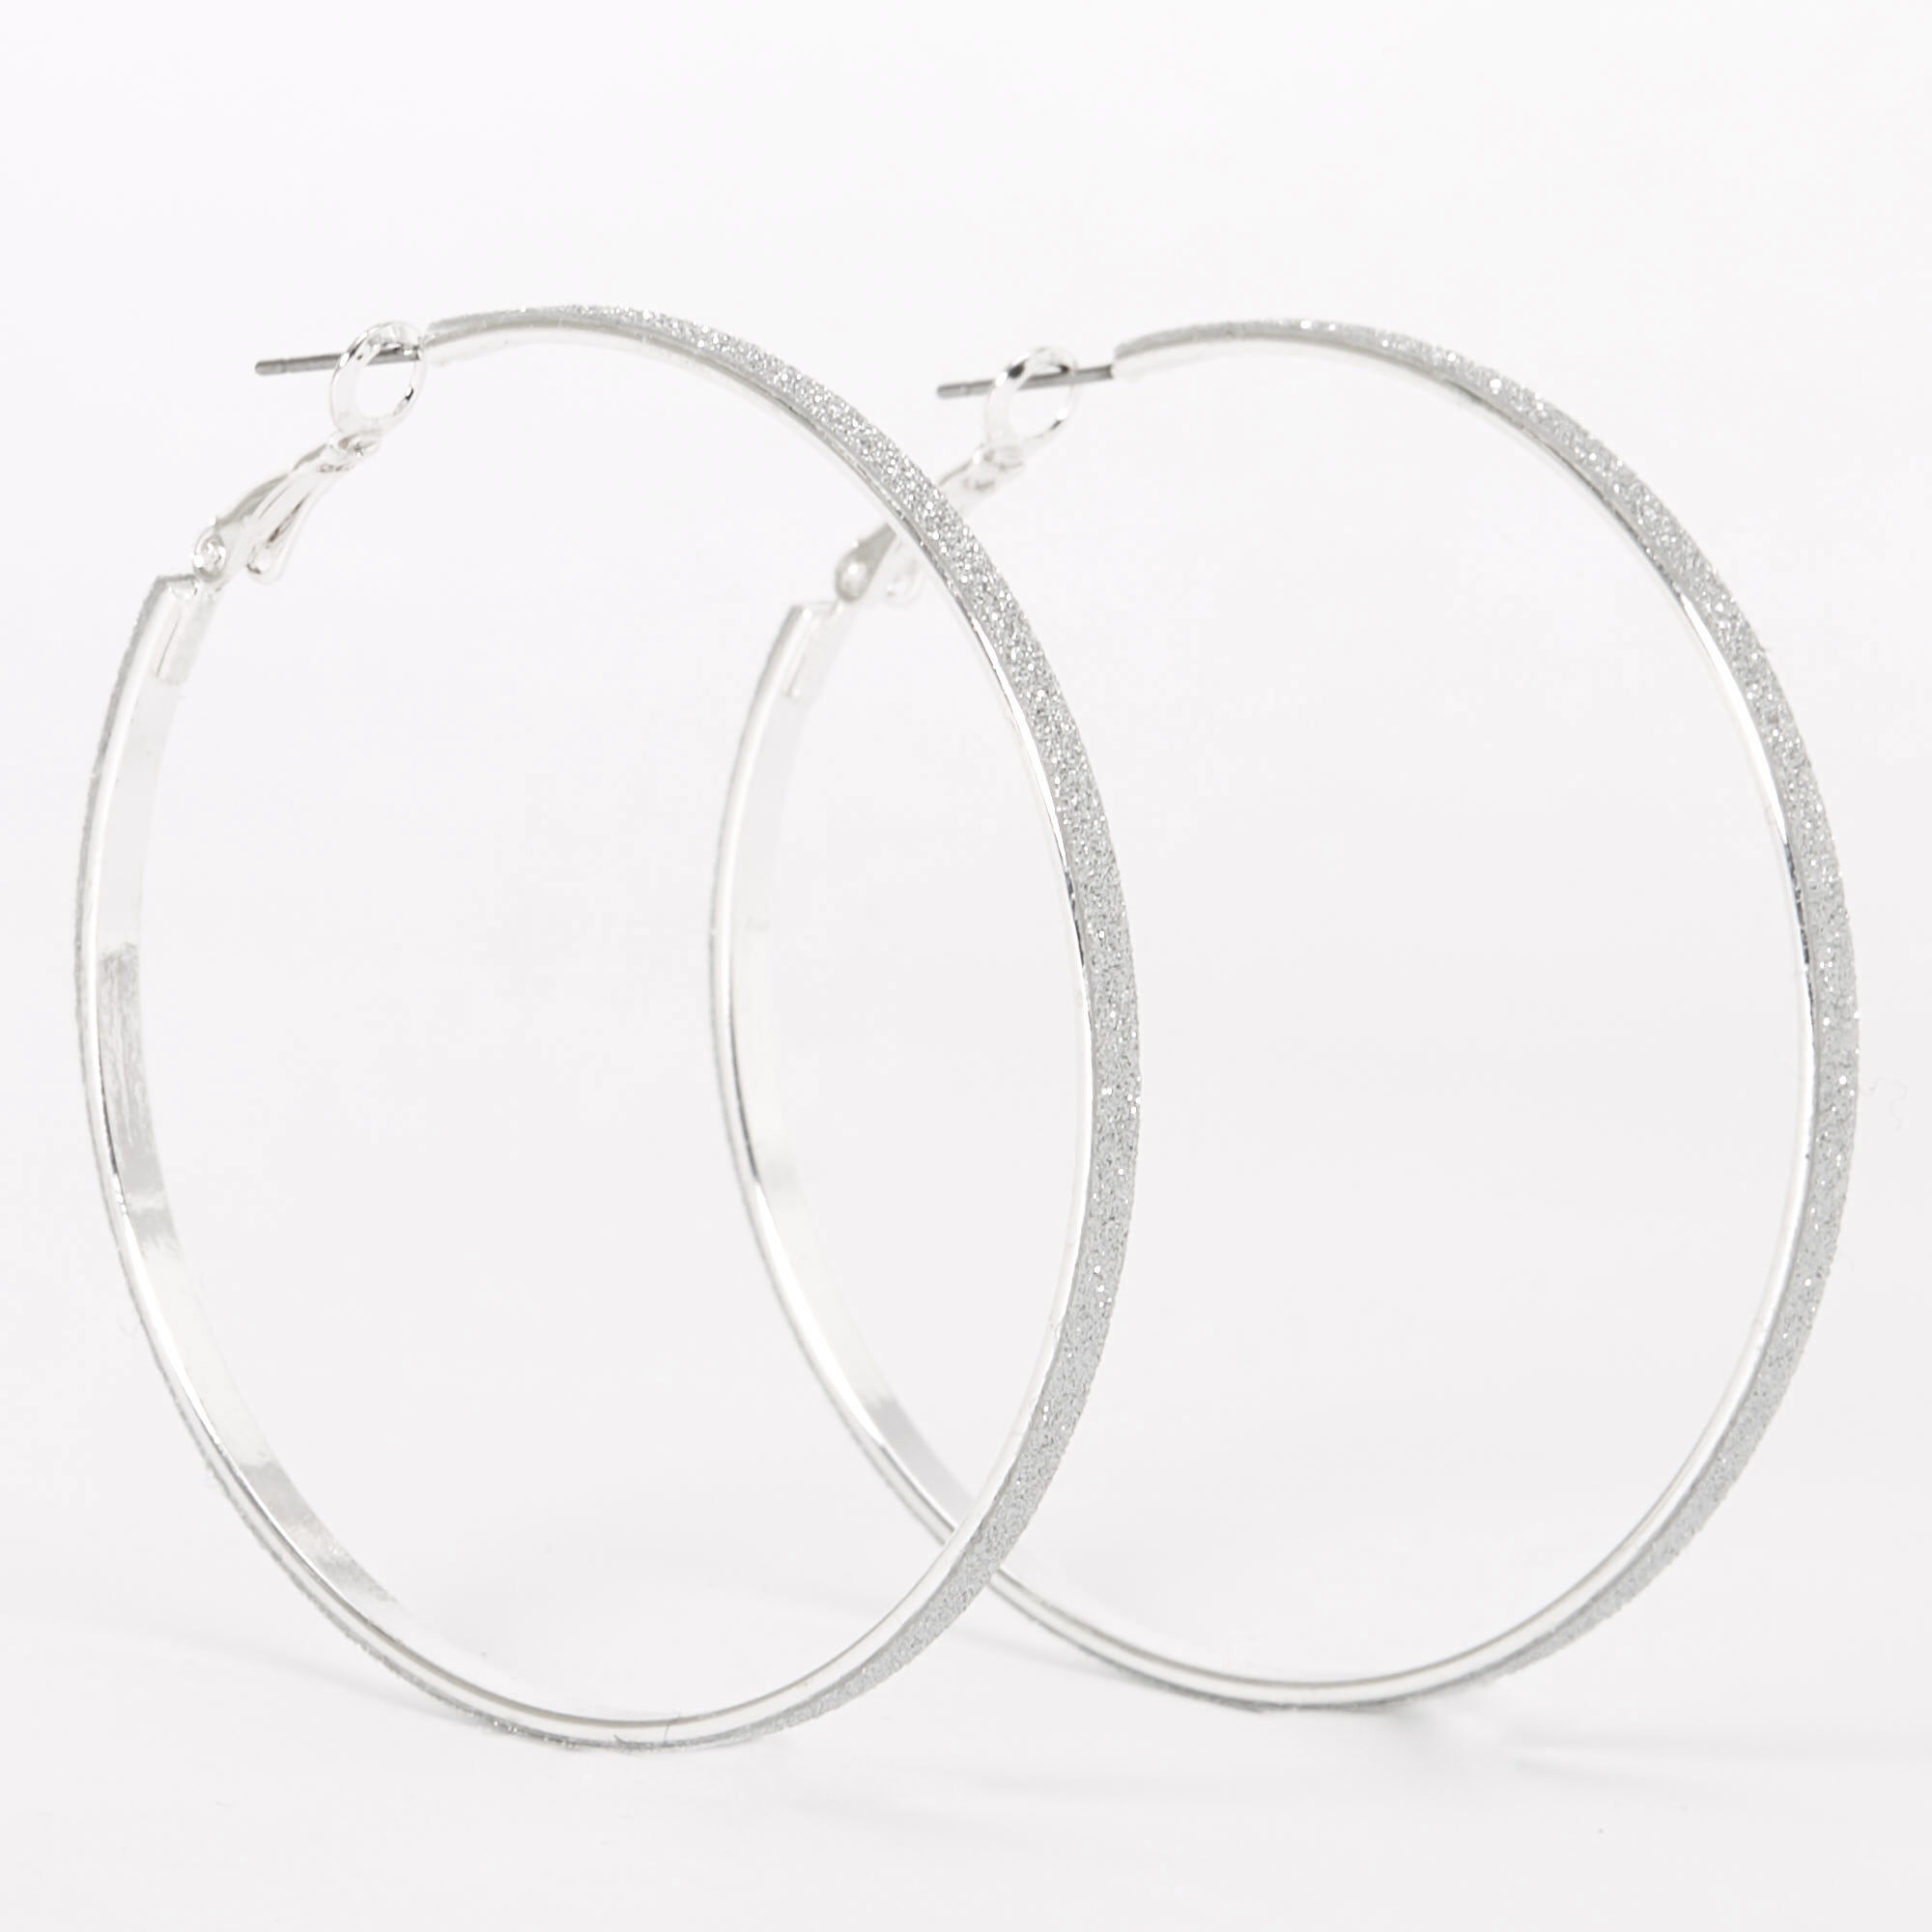 Statement Earrings | 70mm Hoops with Hinged Closure | Stainless Steel |  Silver | 1 Pair | E'arrs Inc.